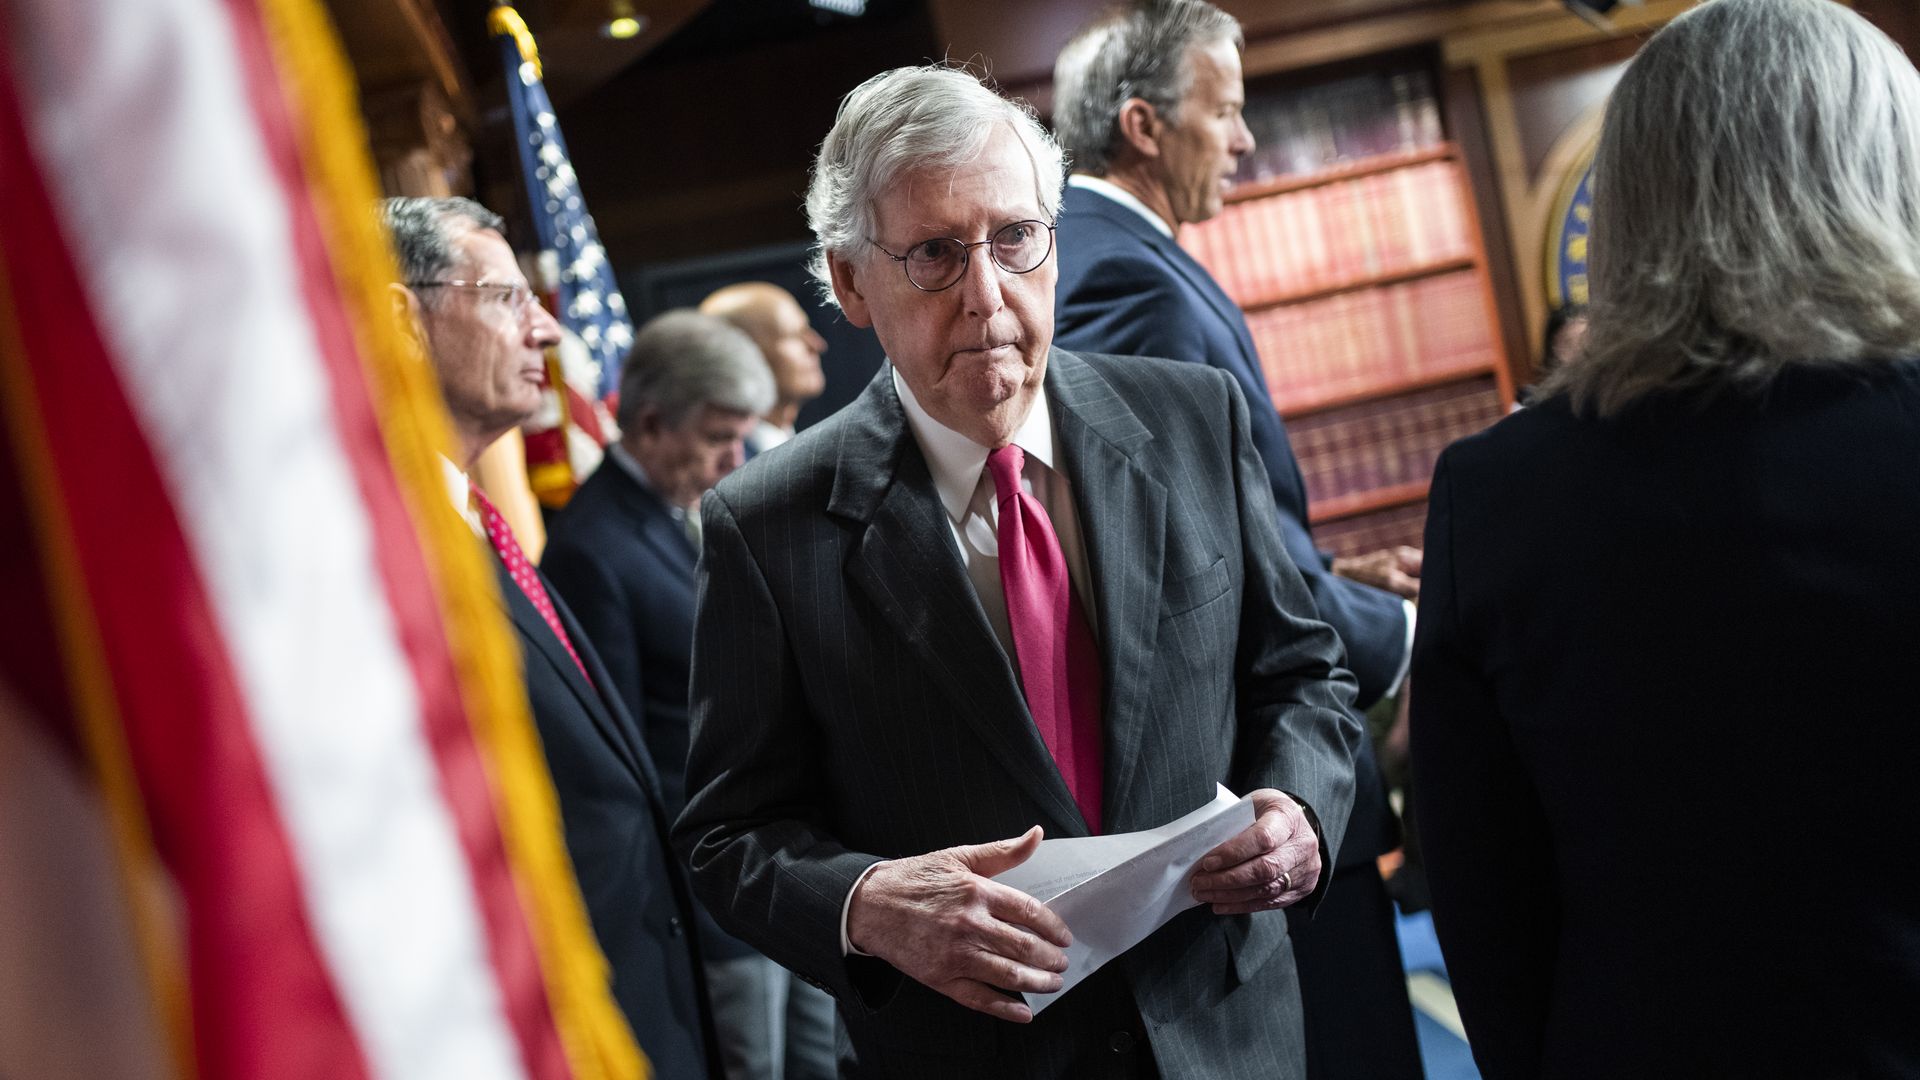 Mitch McConnell wearing a gray suit and red tie departs a press conference where multiple other Republican Senate leaders are speaking.